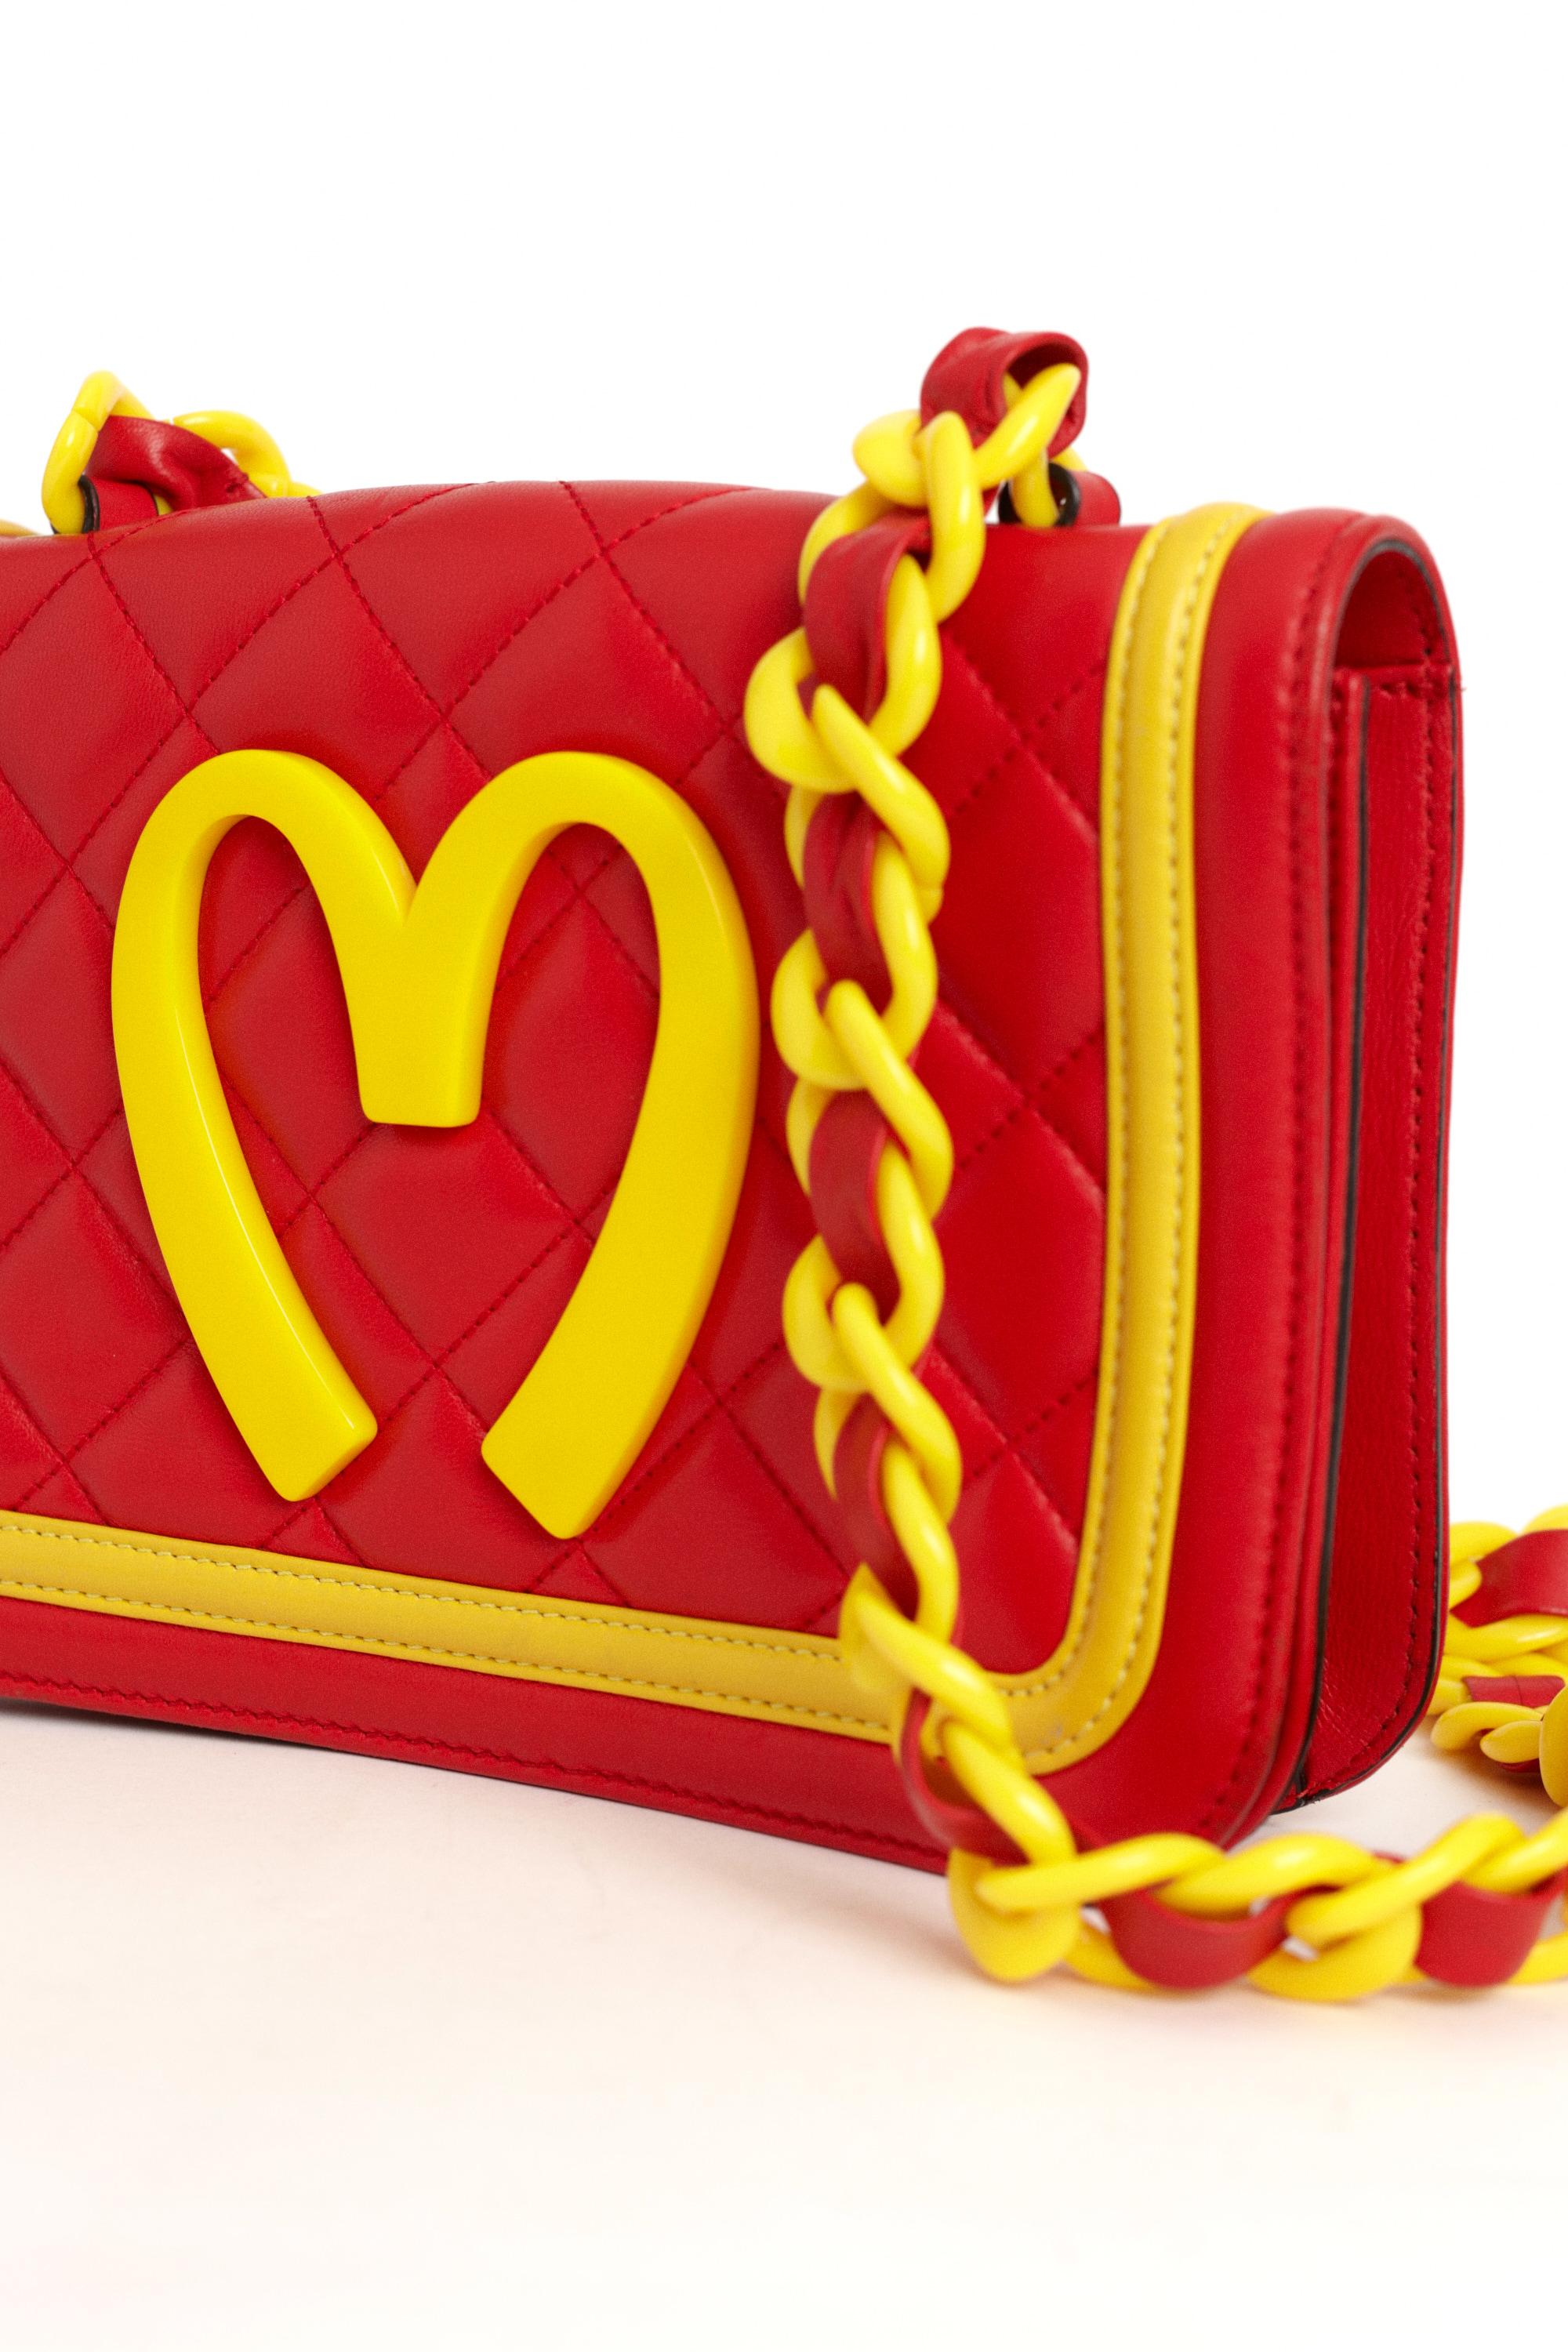 Moschino F/W 2014 McDonald's Leather Crossbody Bag In Good Condition For Sale In London, GB